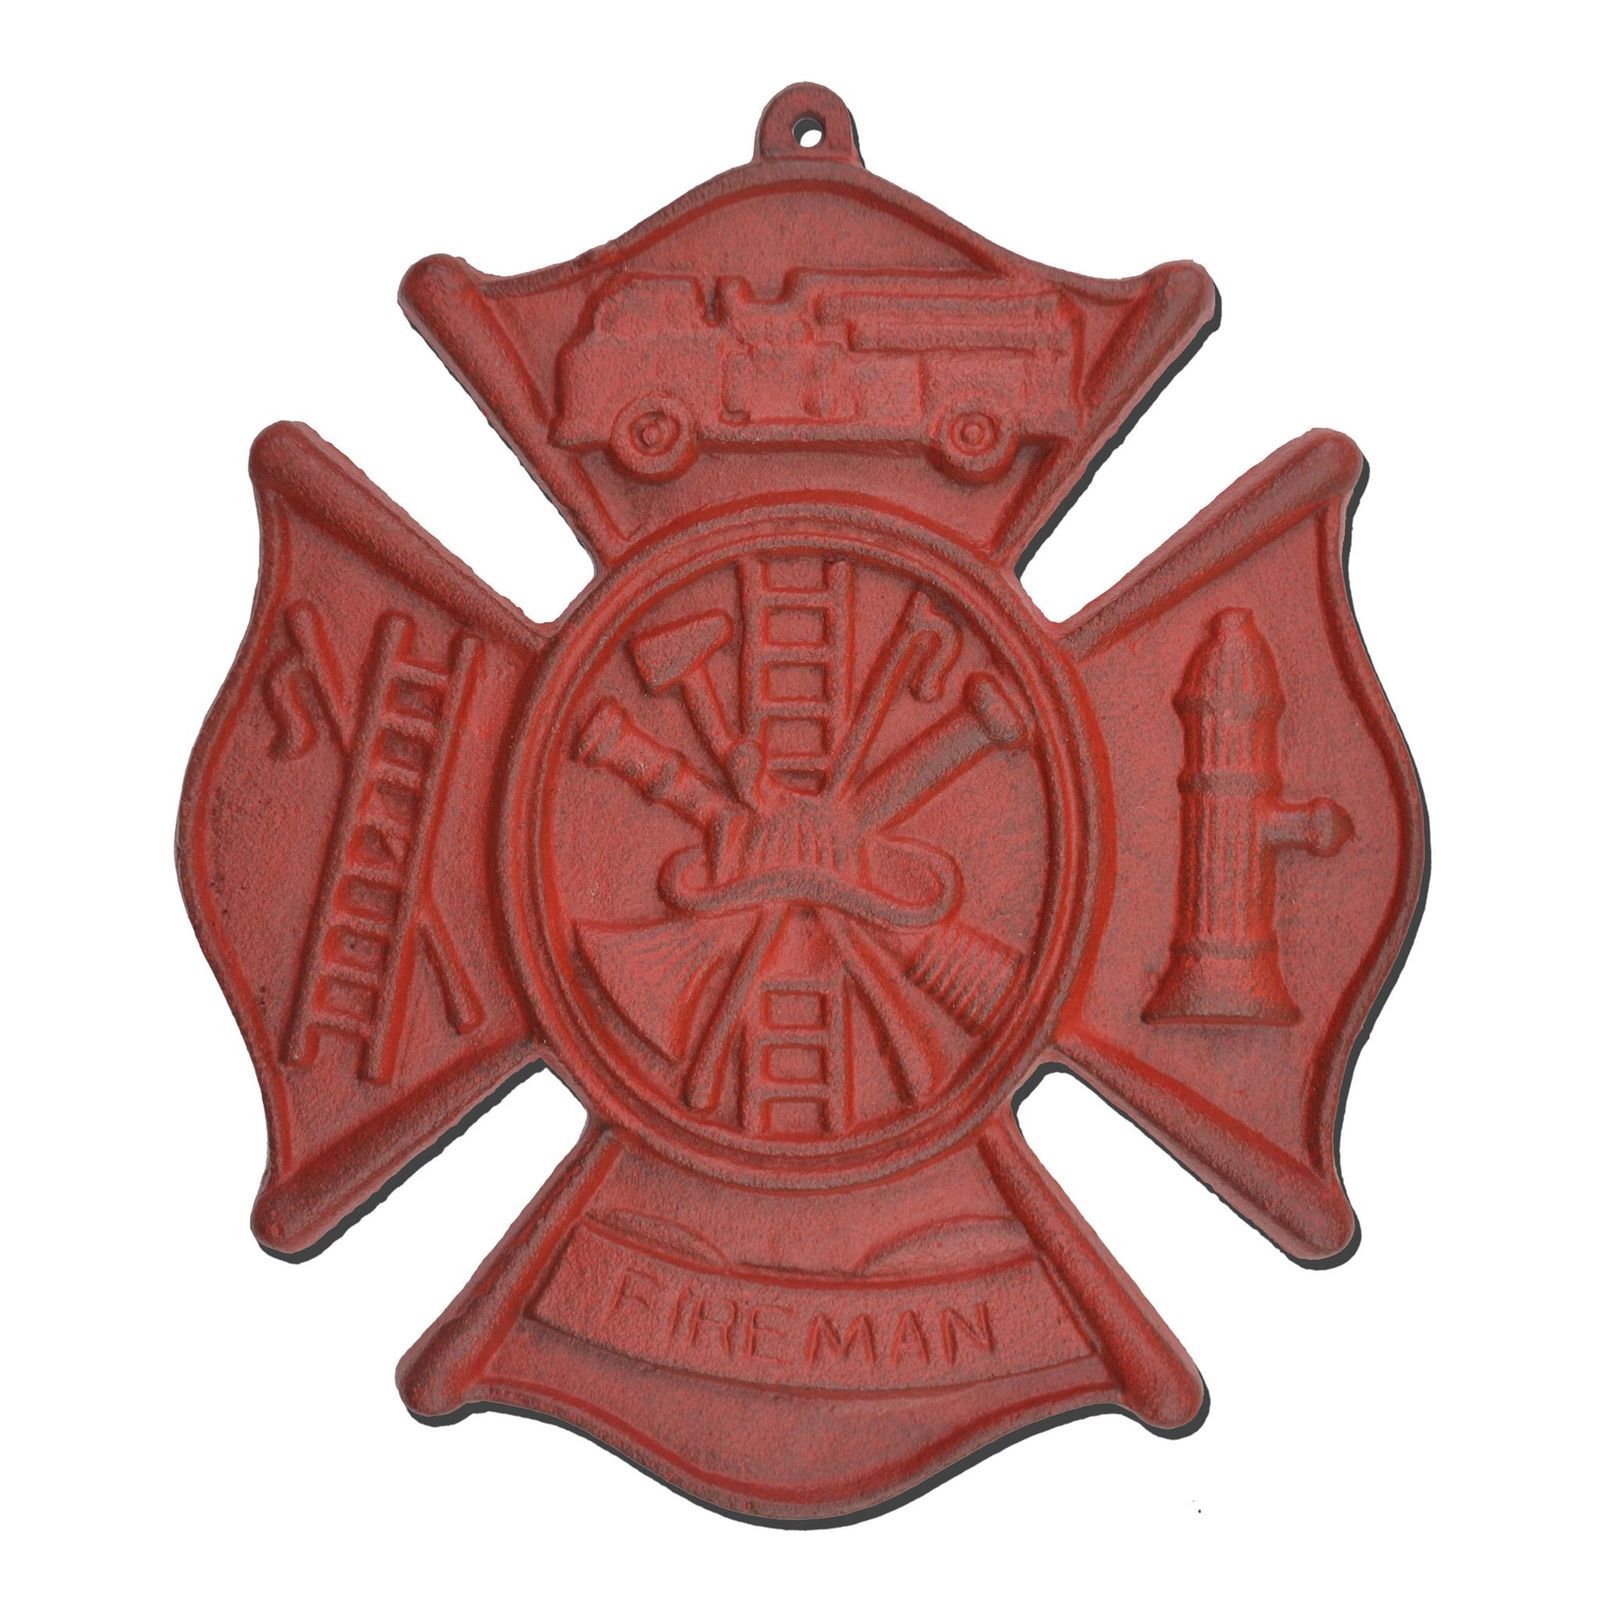 Firefighting Firemans Cross Hanging Wall Plaque Red Cast Iron Maltese 7.75" W - $18.37